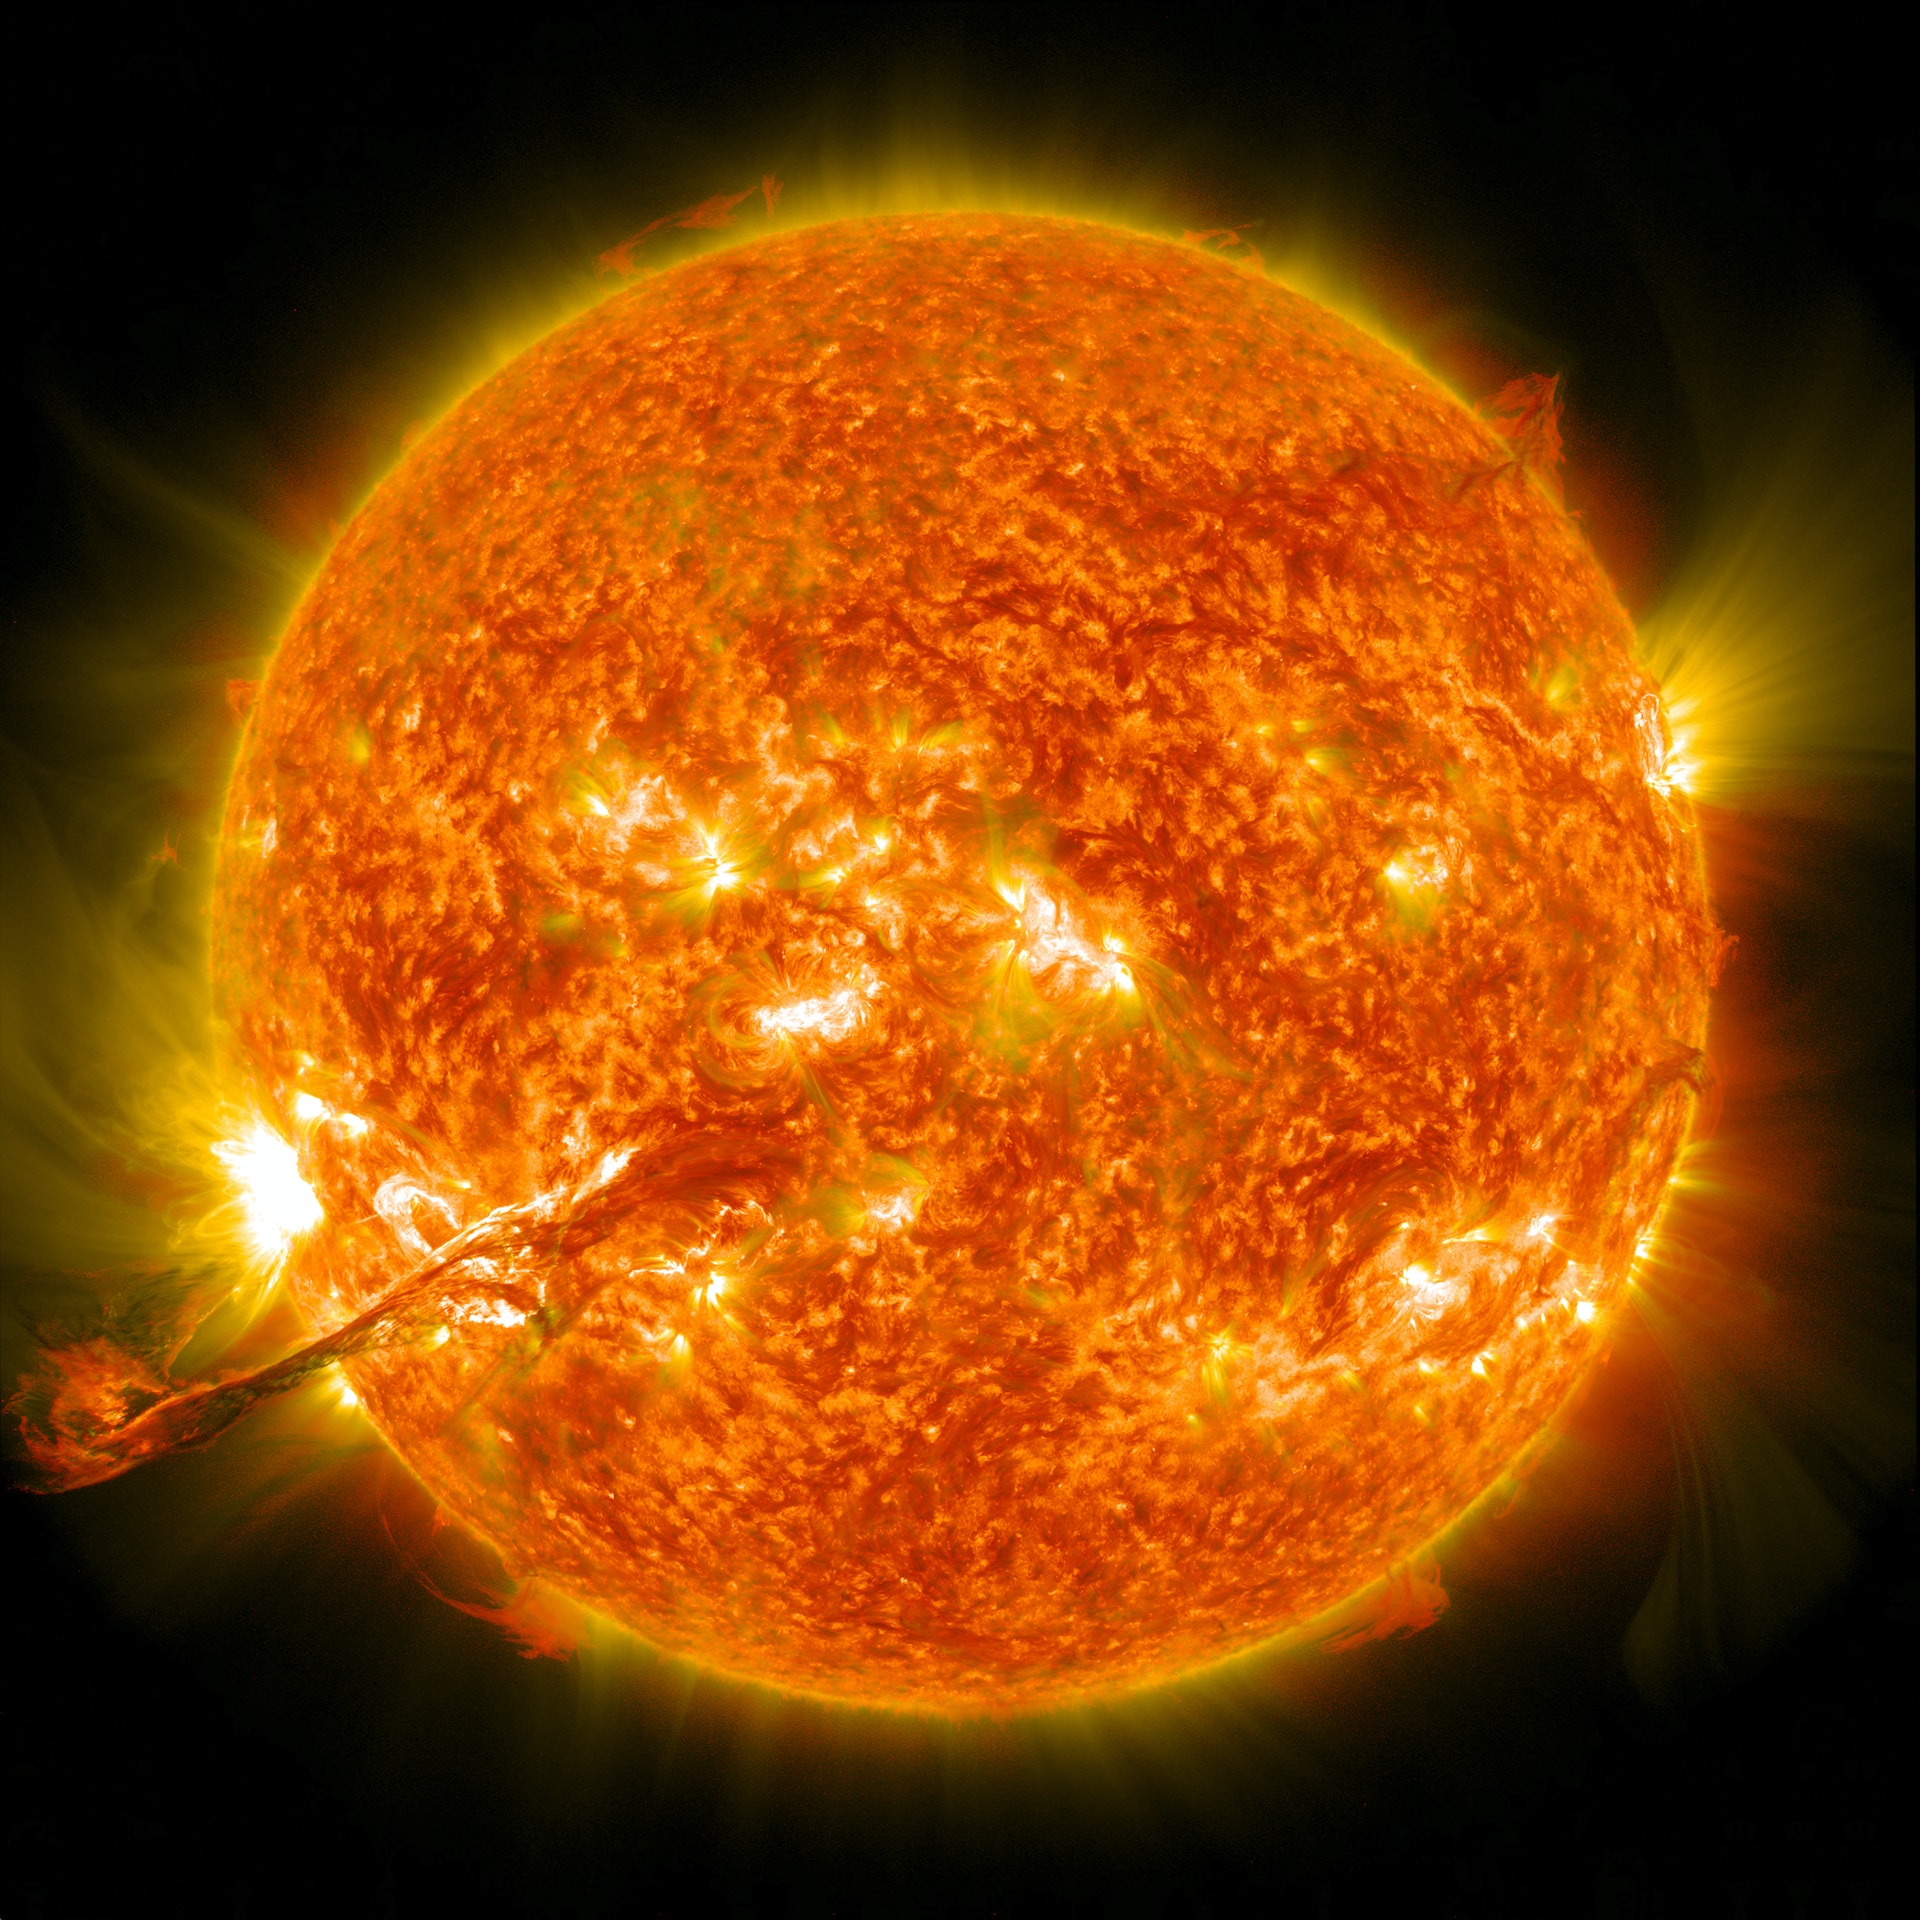 A corona mass ejection erupts from our sun on August 31, 2012